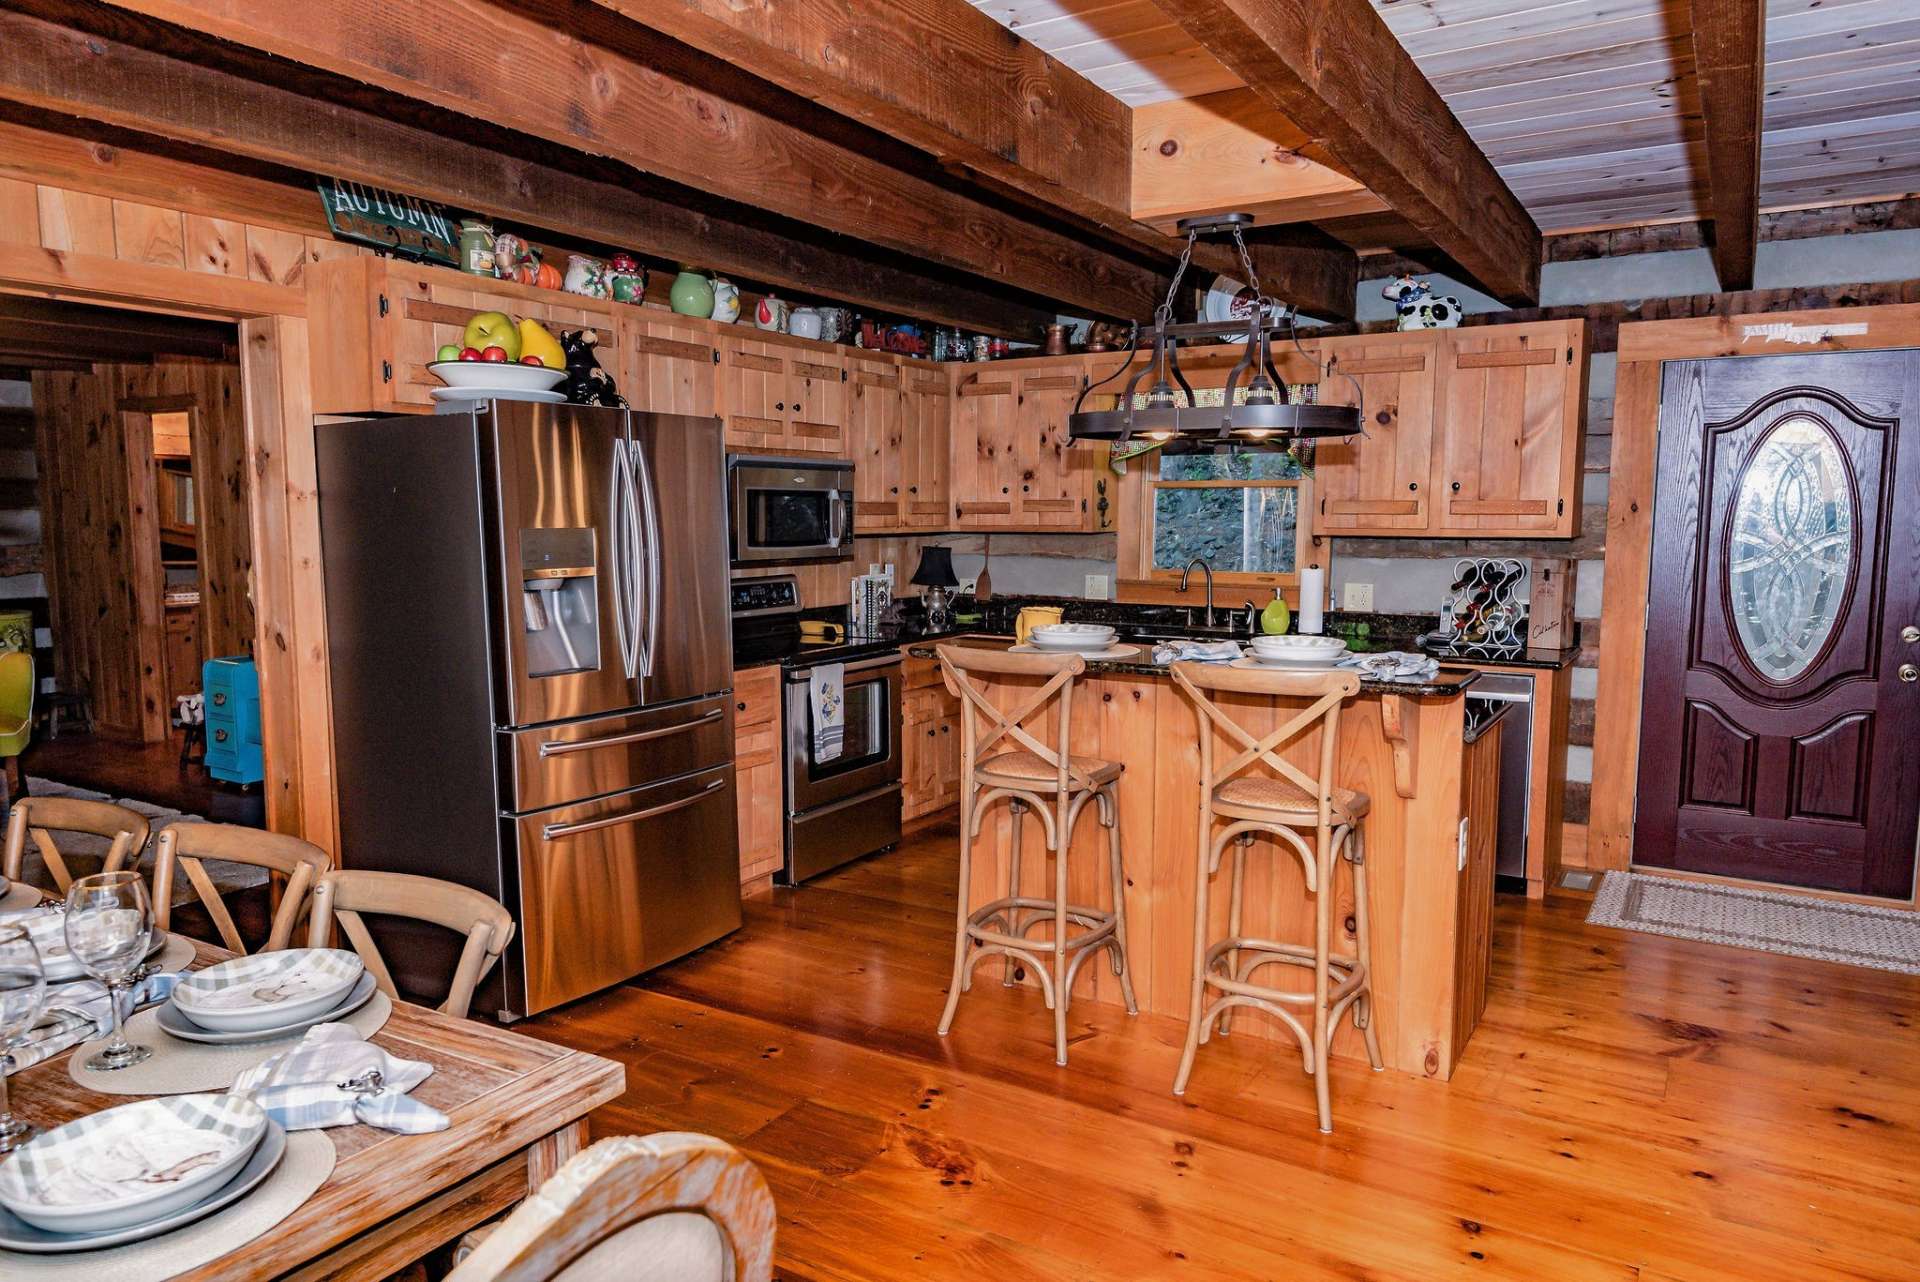 The well equipped kitchen has stainless steel appliances, granite countertops and center island.